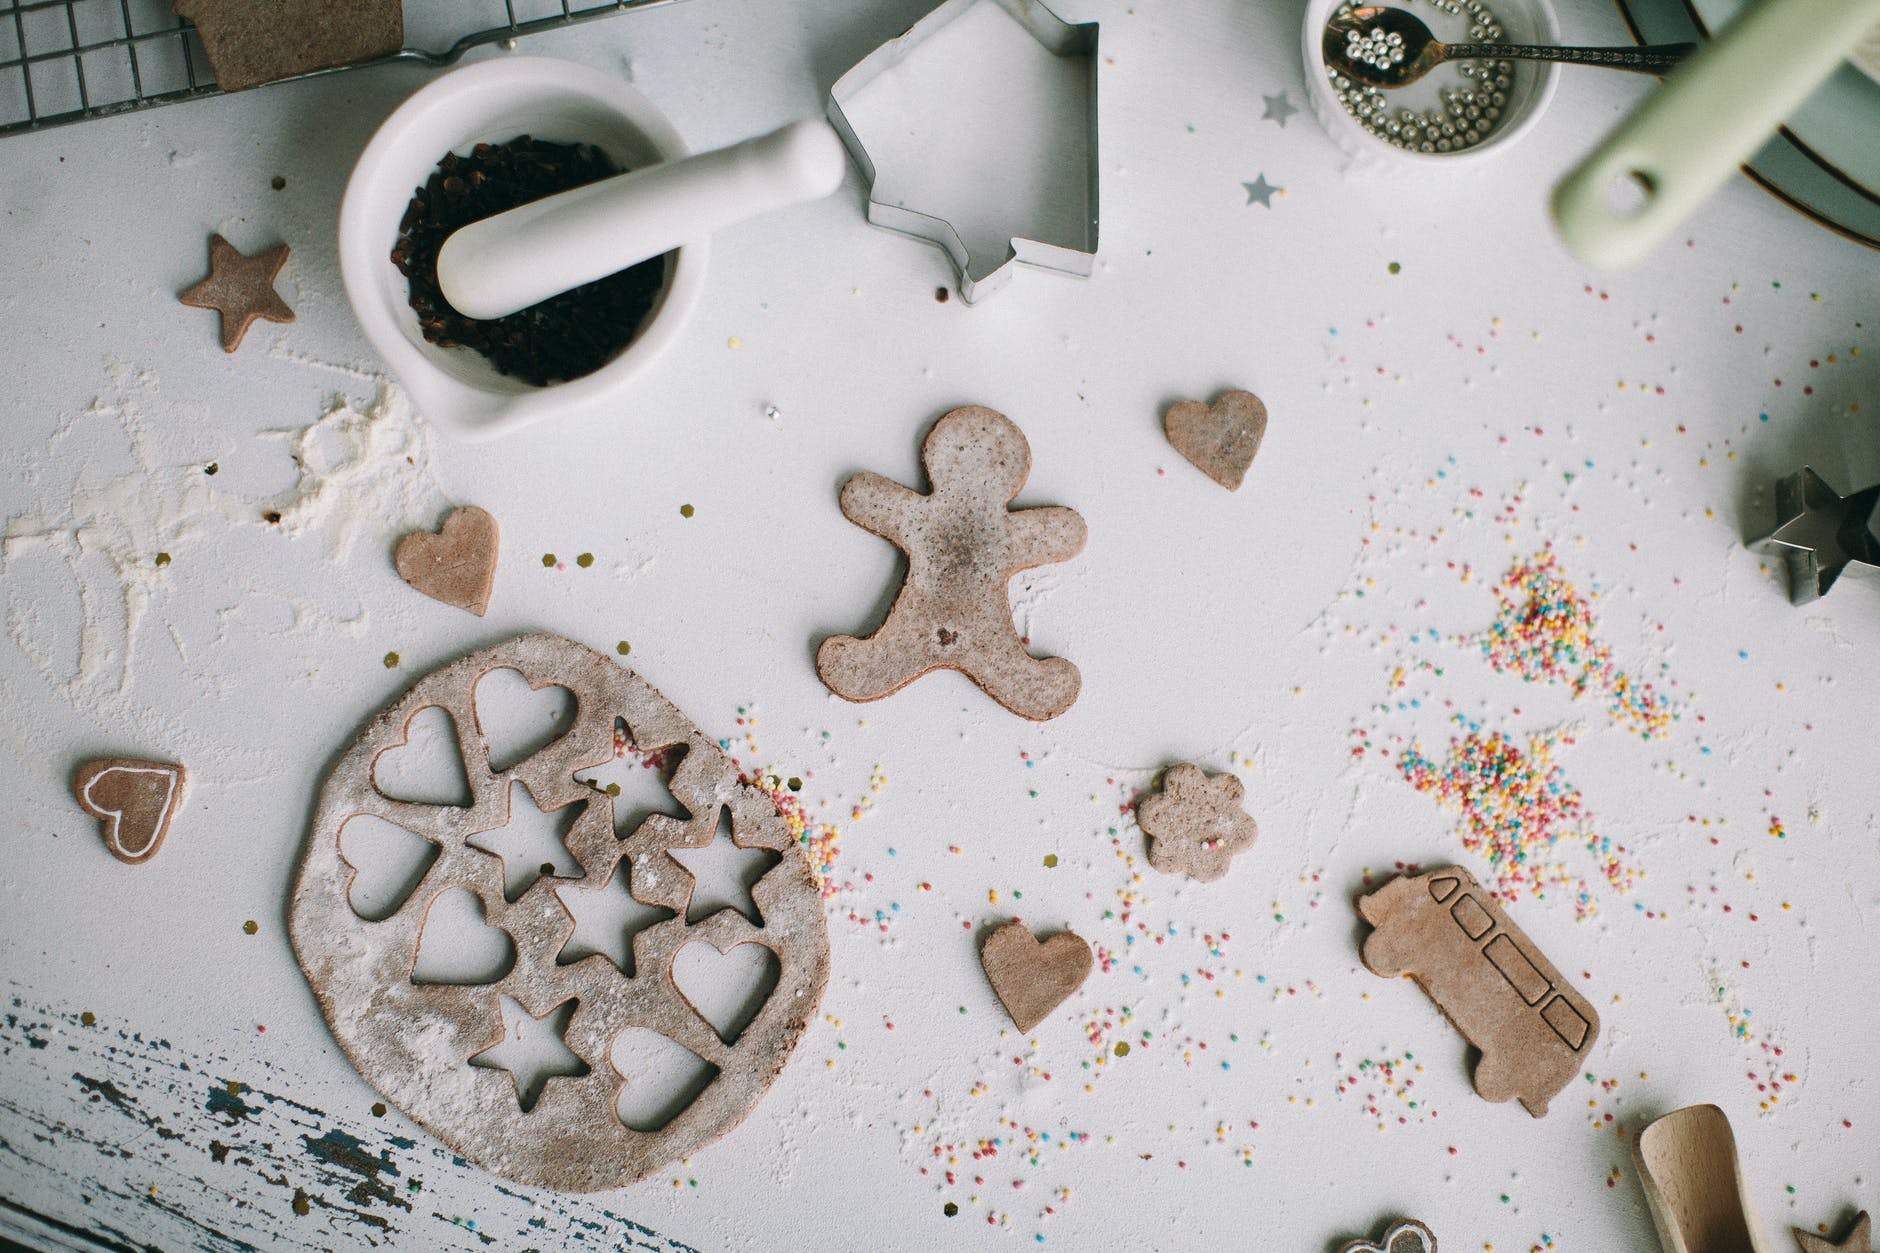 gingerbread cardboard decor on white surface